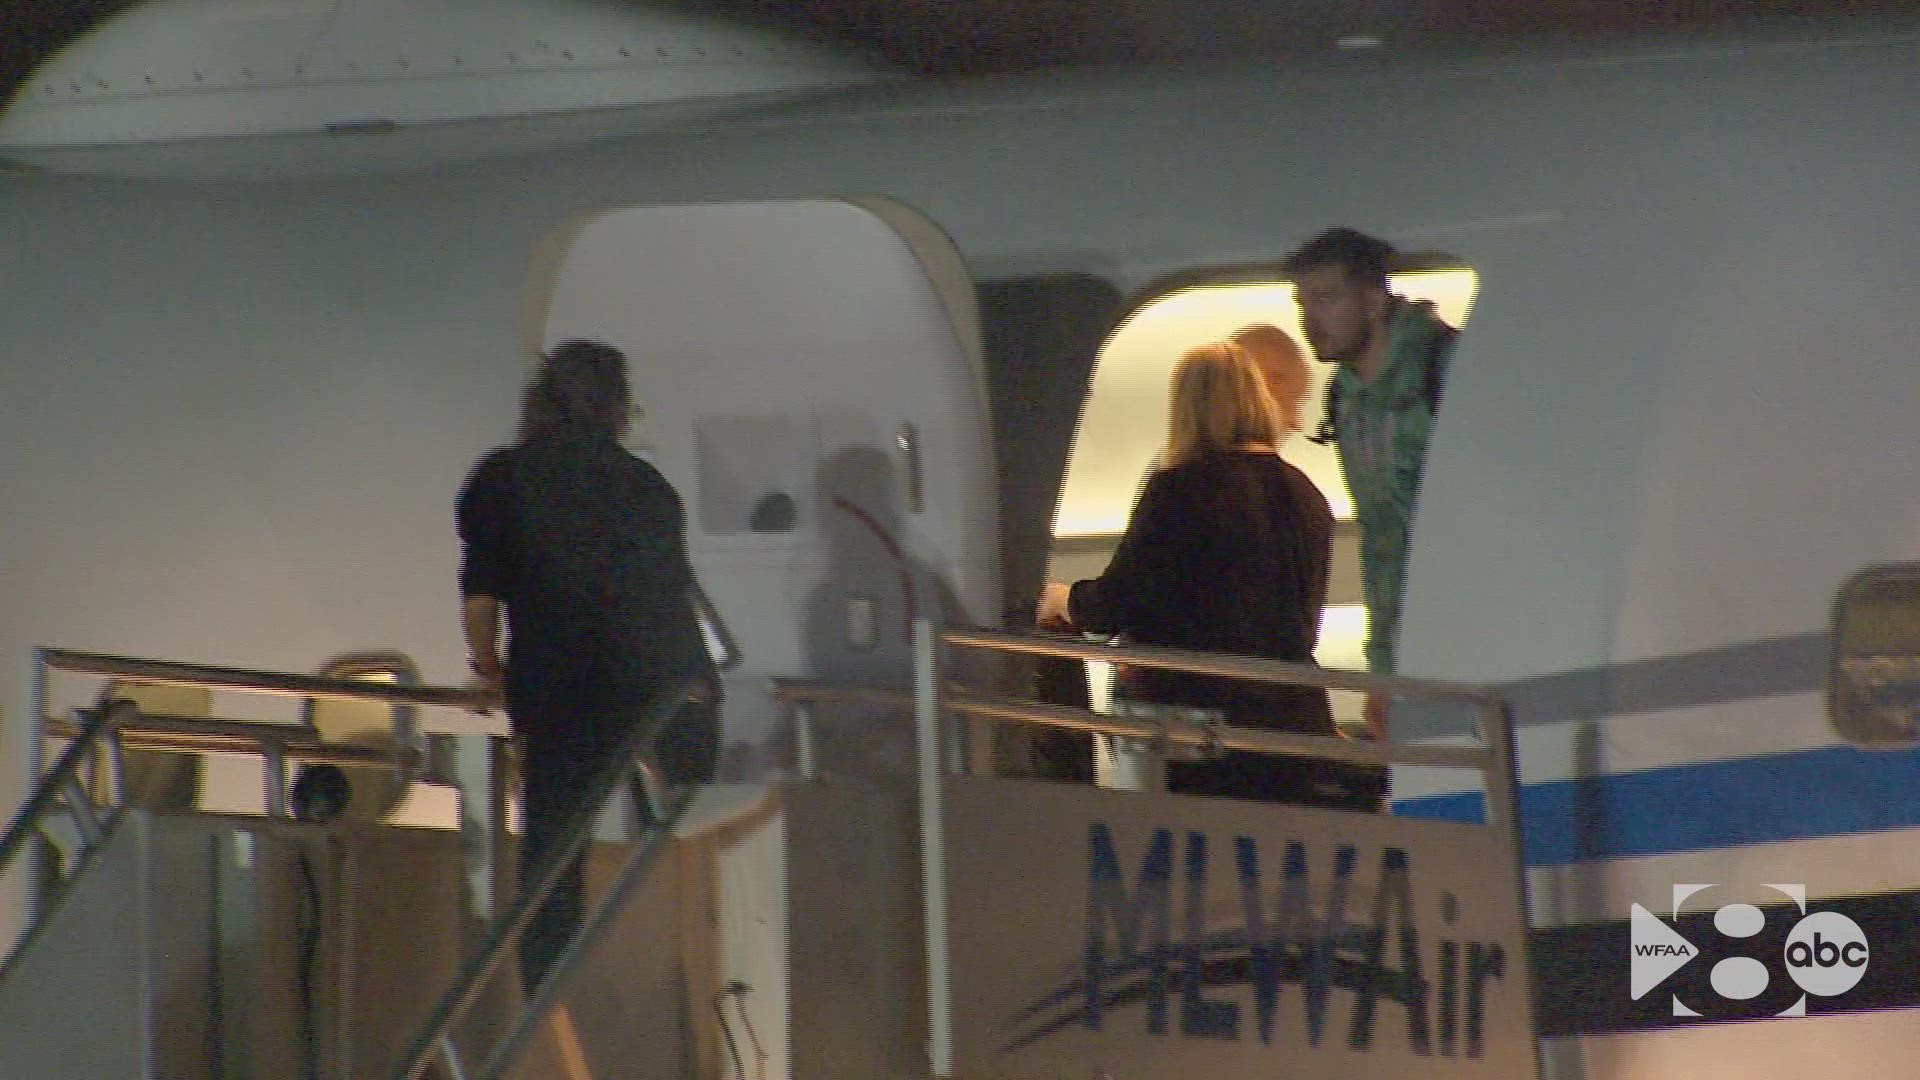 The Dallas Mavericks arrived at Love Field overnight after their Game 6 win over the Utah Jazz.